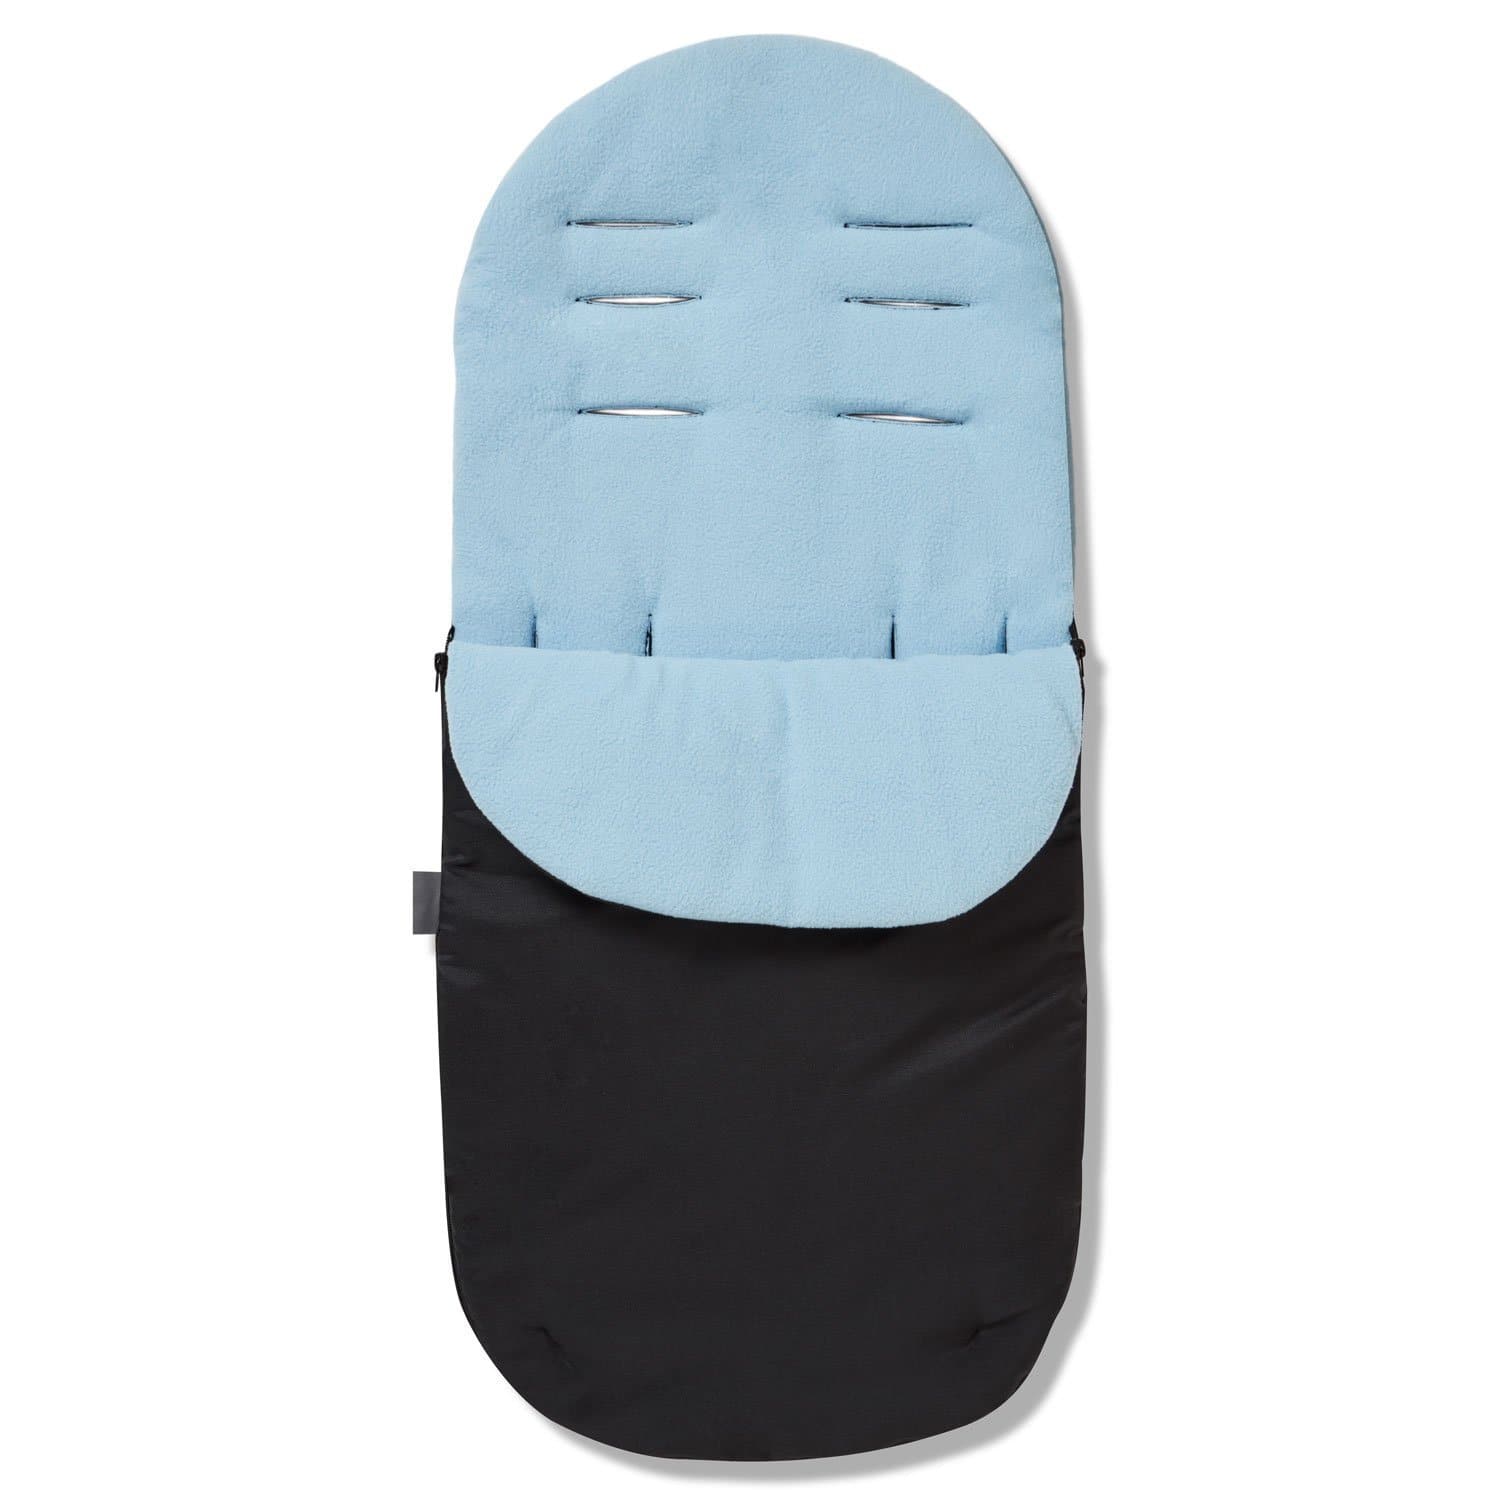 Footmuff / Cosy Toes Compatible with Inglesina - Light Blue / Fits All Models | For Your Little One